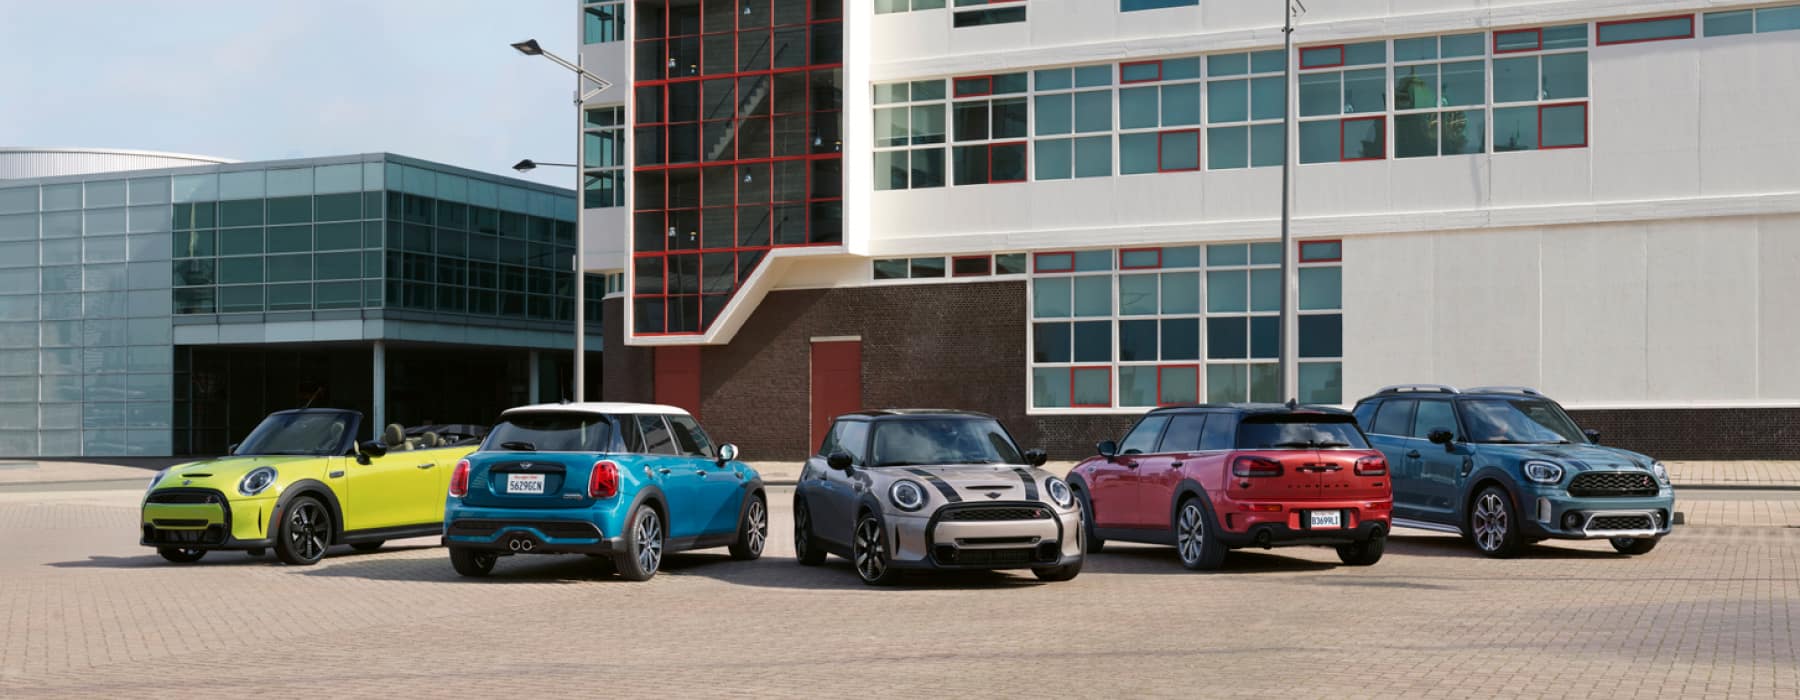 Family of MINI’s parked in front of a building.